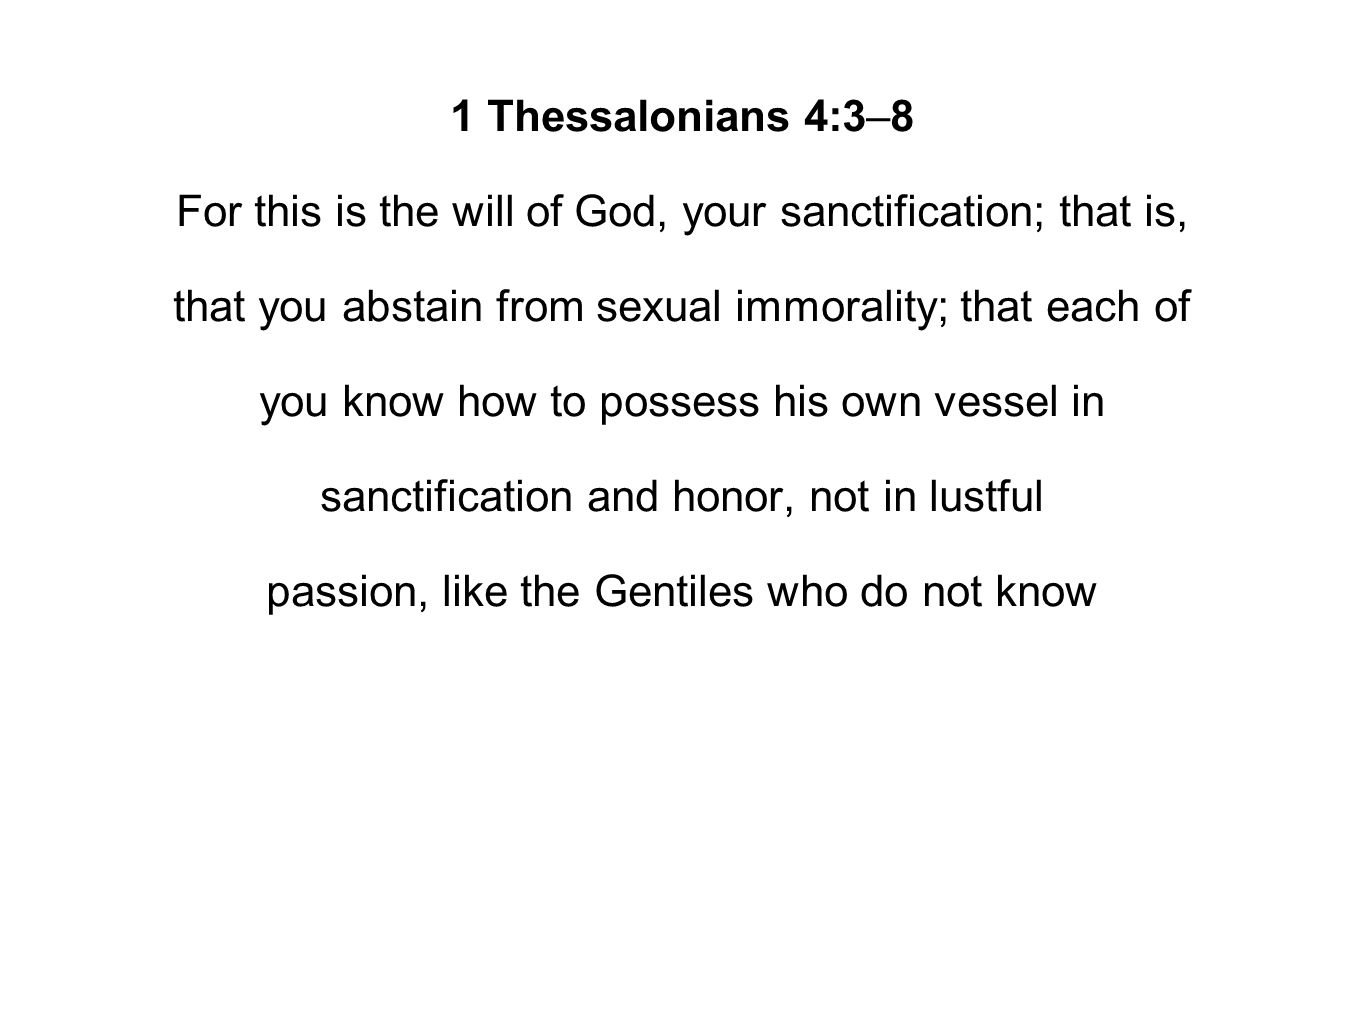 1 Thessalonians 4:3–8 For this is the will of God, your sanctification; that is, that you abstain from sexual immorality; that each of you know how to possess his own vessel in sanctification and honor, not in lustful passion, like the Gentiles who do not know